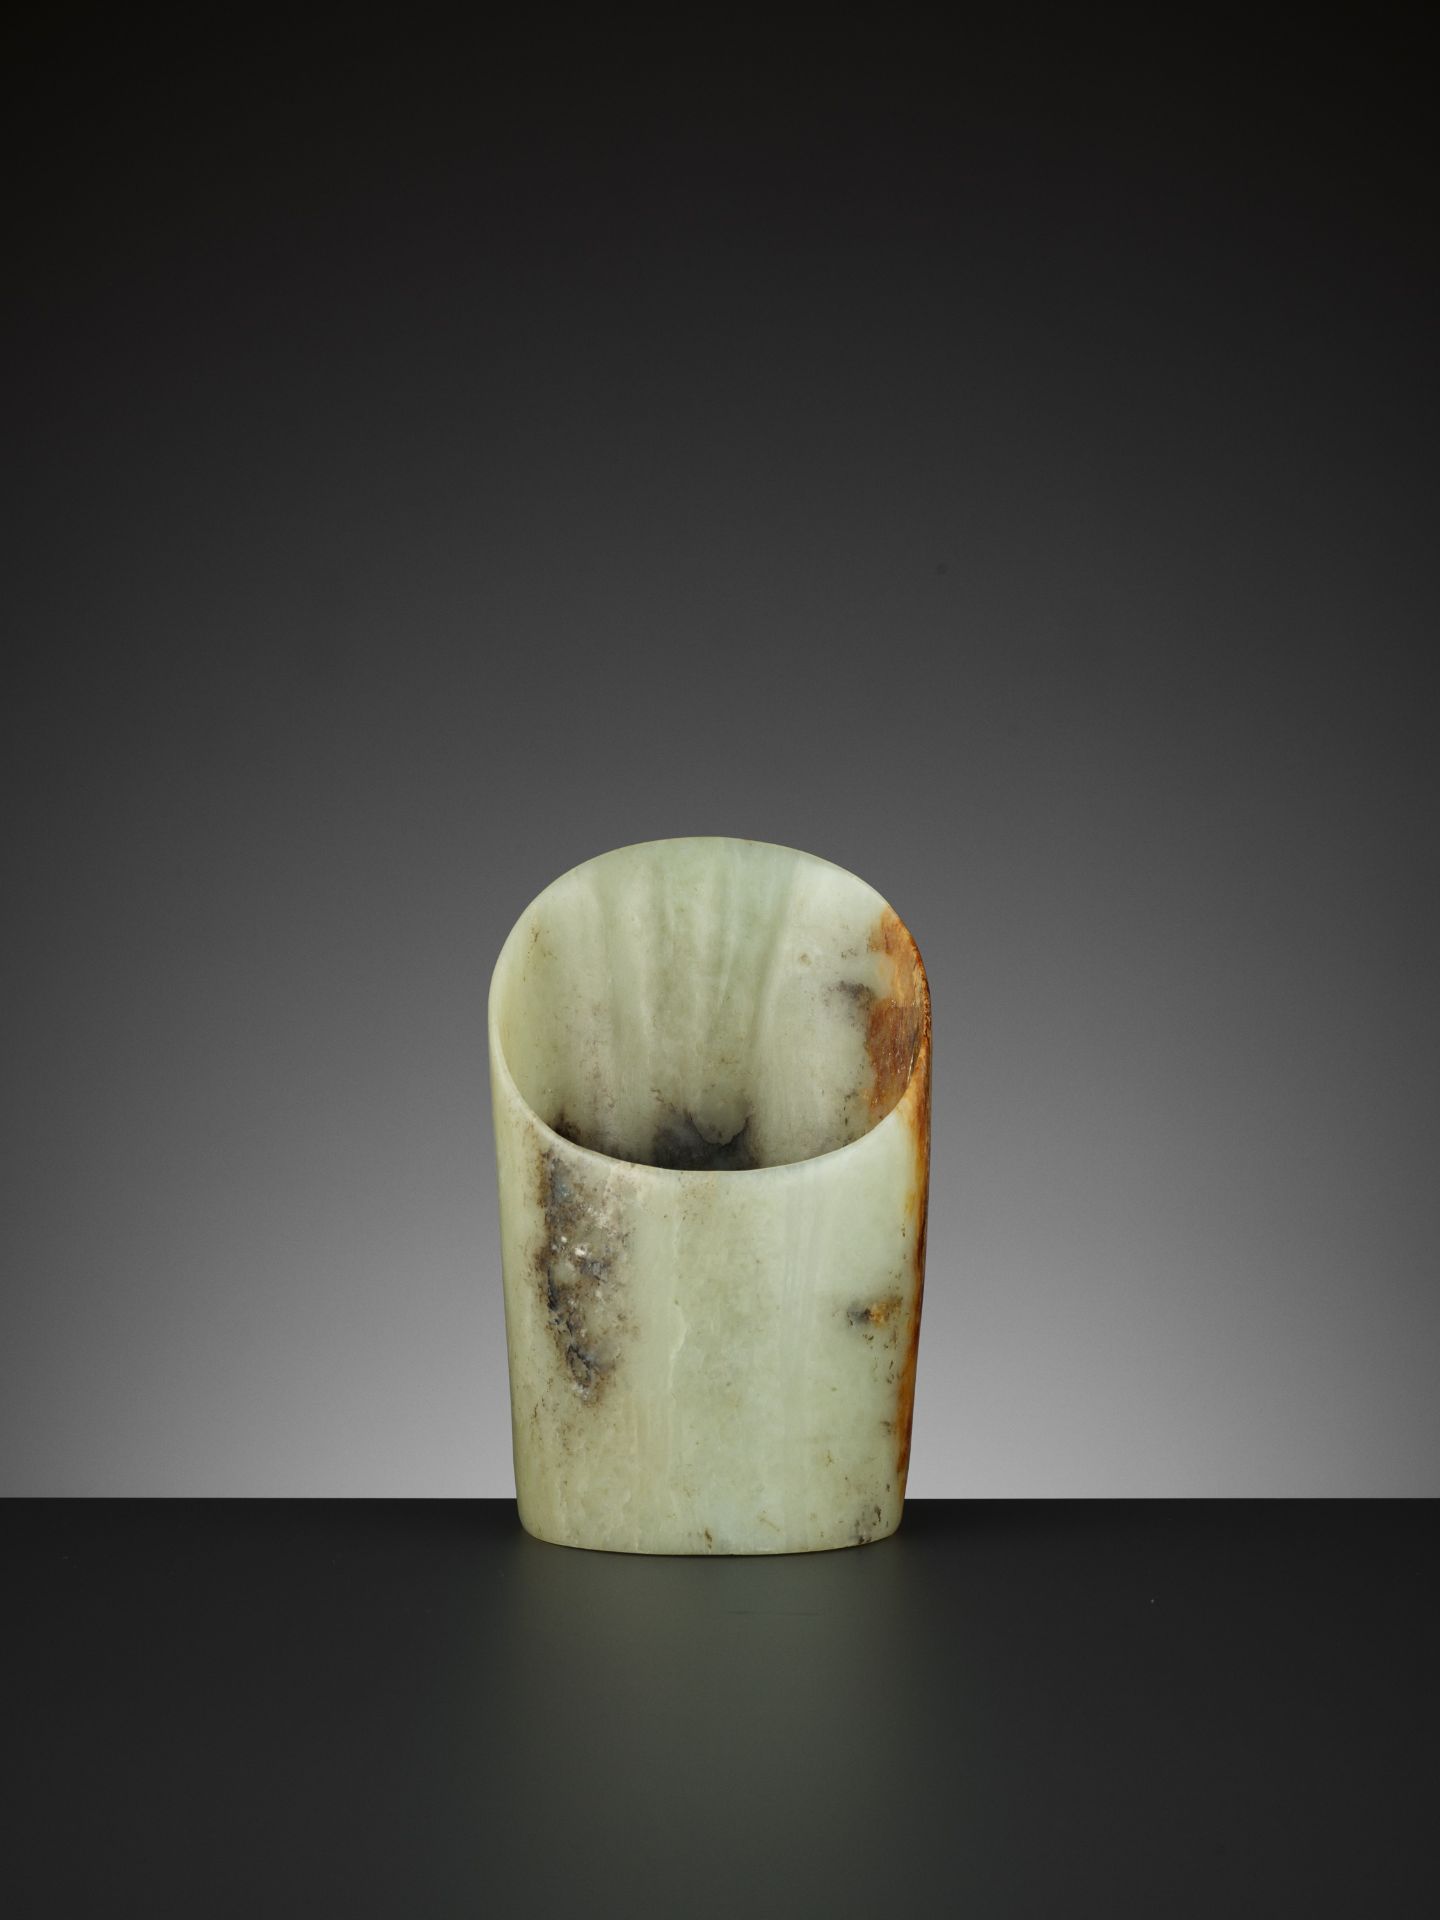 A PALE YELLOW AND RUSSET JADE HOOF-SHAPED ORNAMENT, HONGSHAN - Image 2 of 13